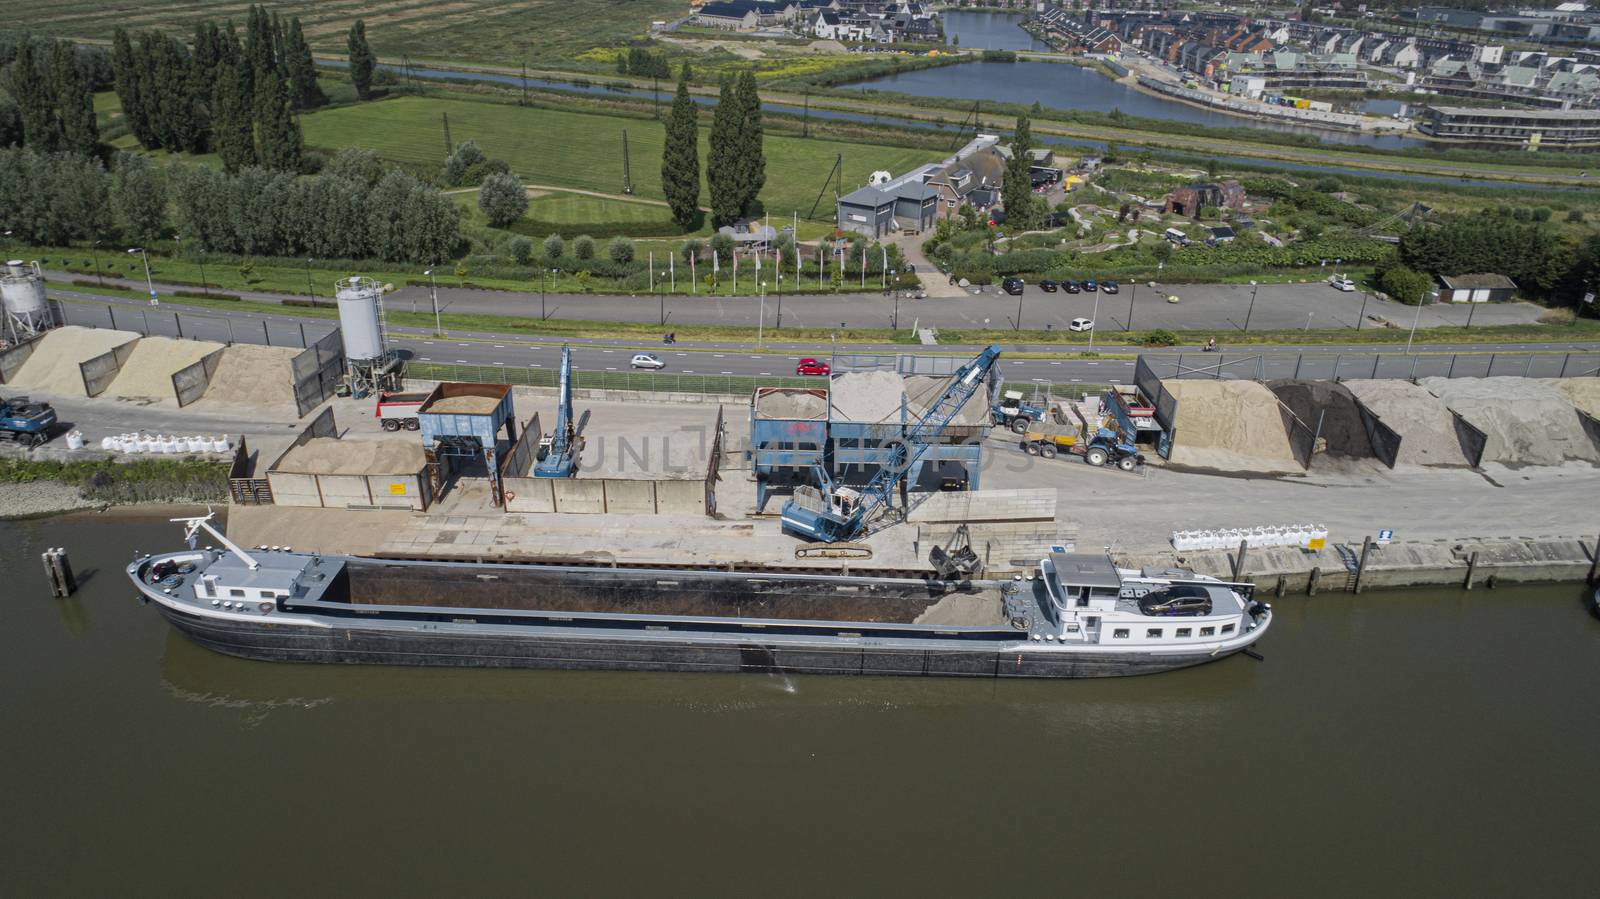 Loading barge with sand and rubble on a small berth. Freight tra by Tjeerdkruse